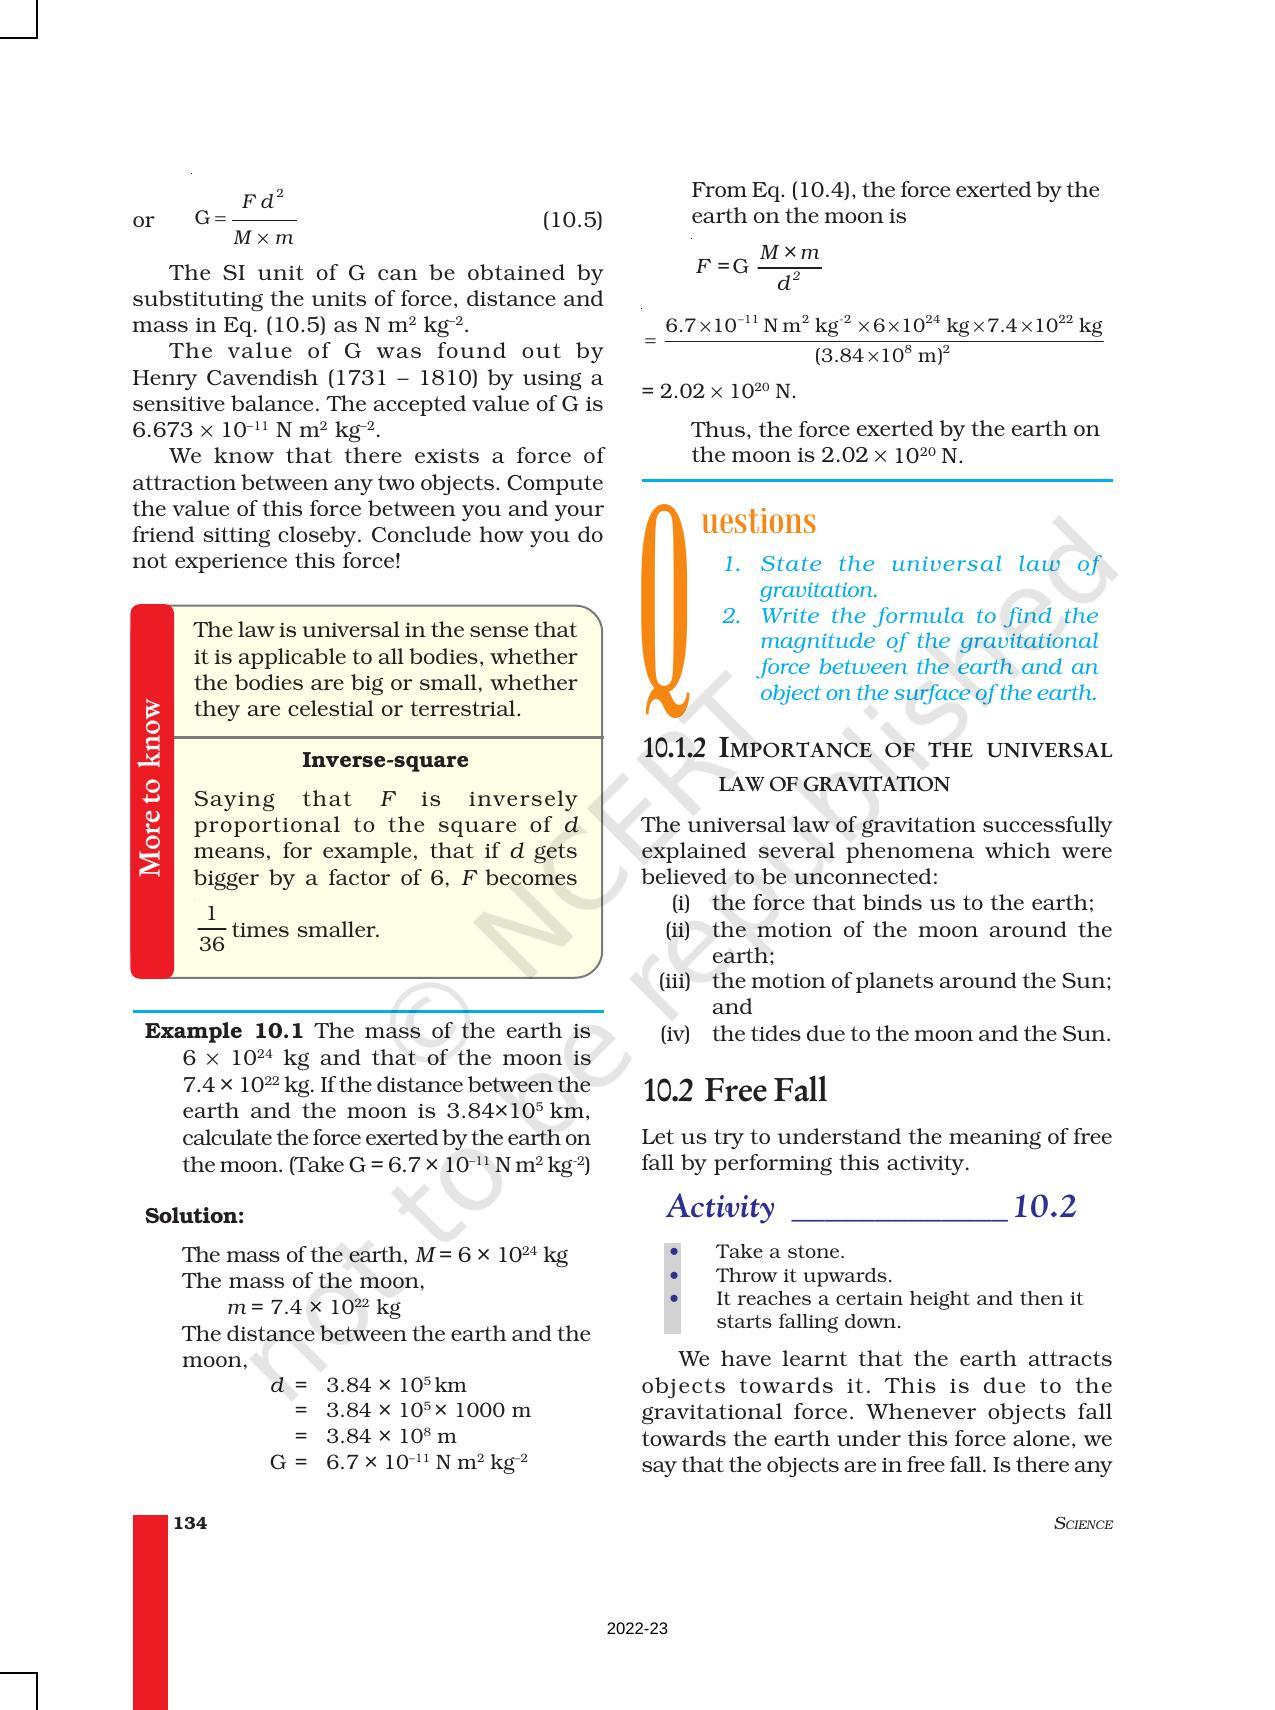 NCERT Book for Class 9 Science Chapter 10 Gravitation - Page 4